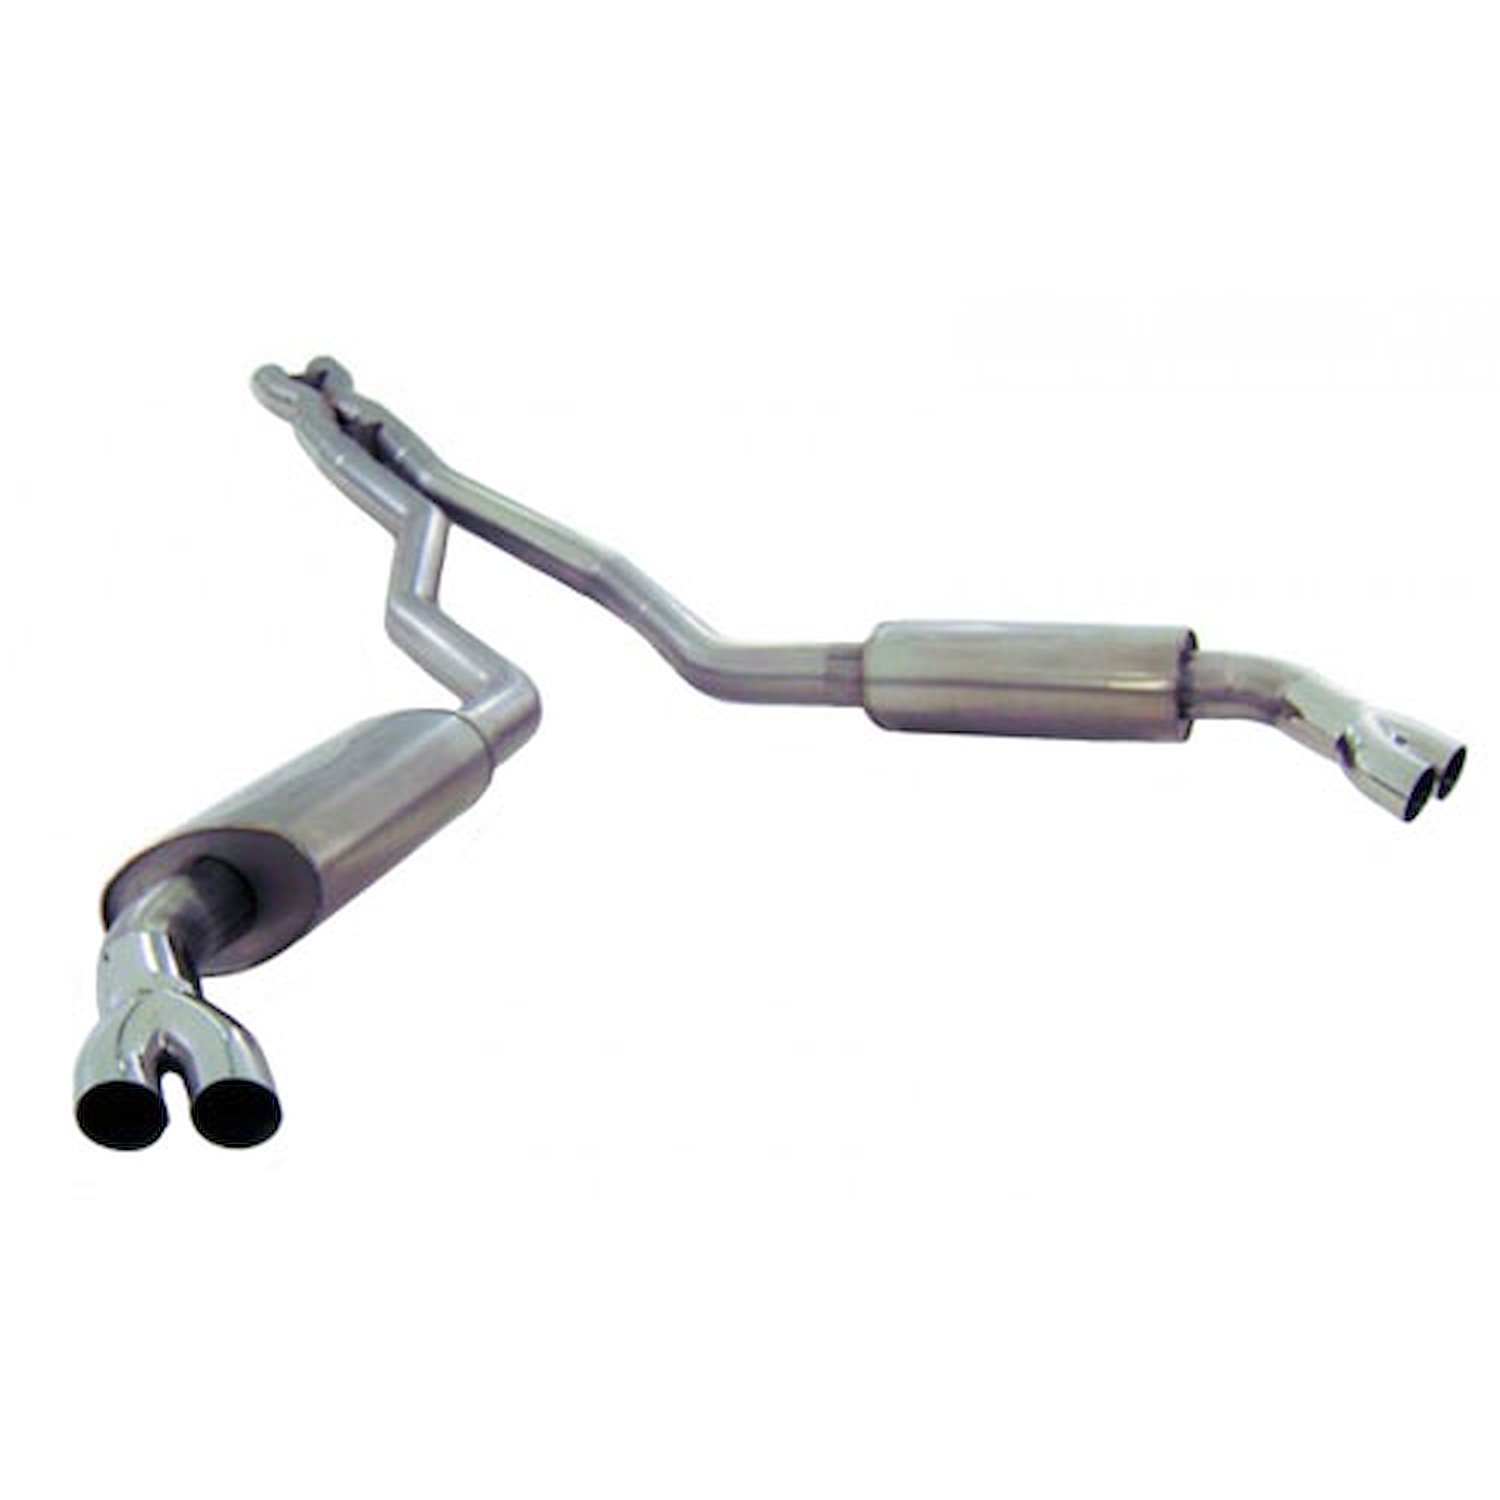 2010+ Camaro 6.2L 304 SS CNC mandrel bent 3 dual exhaust system with x-pipe dual chambered turbo muf